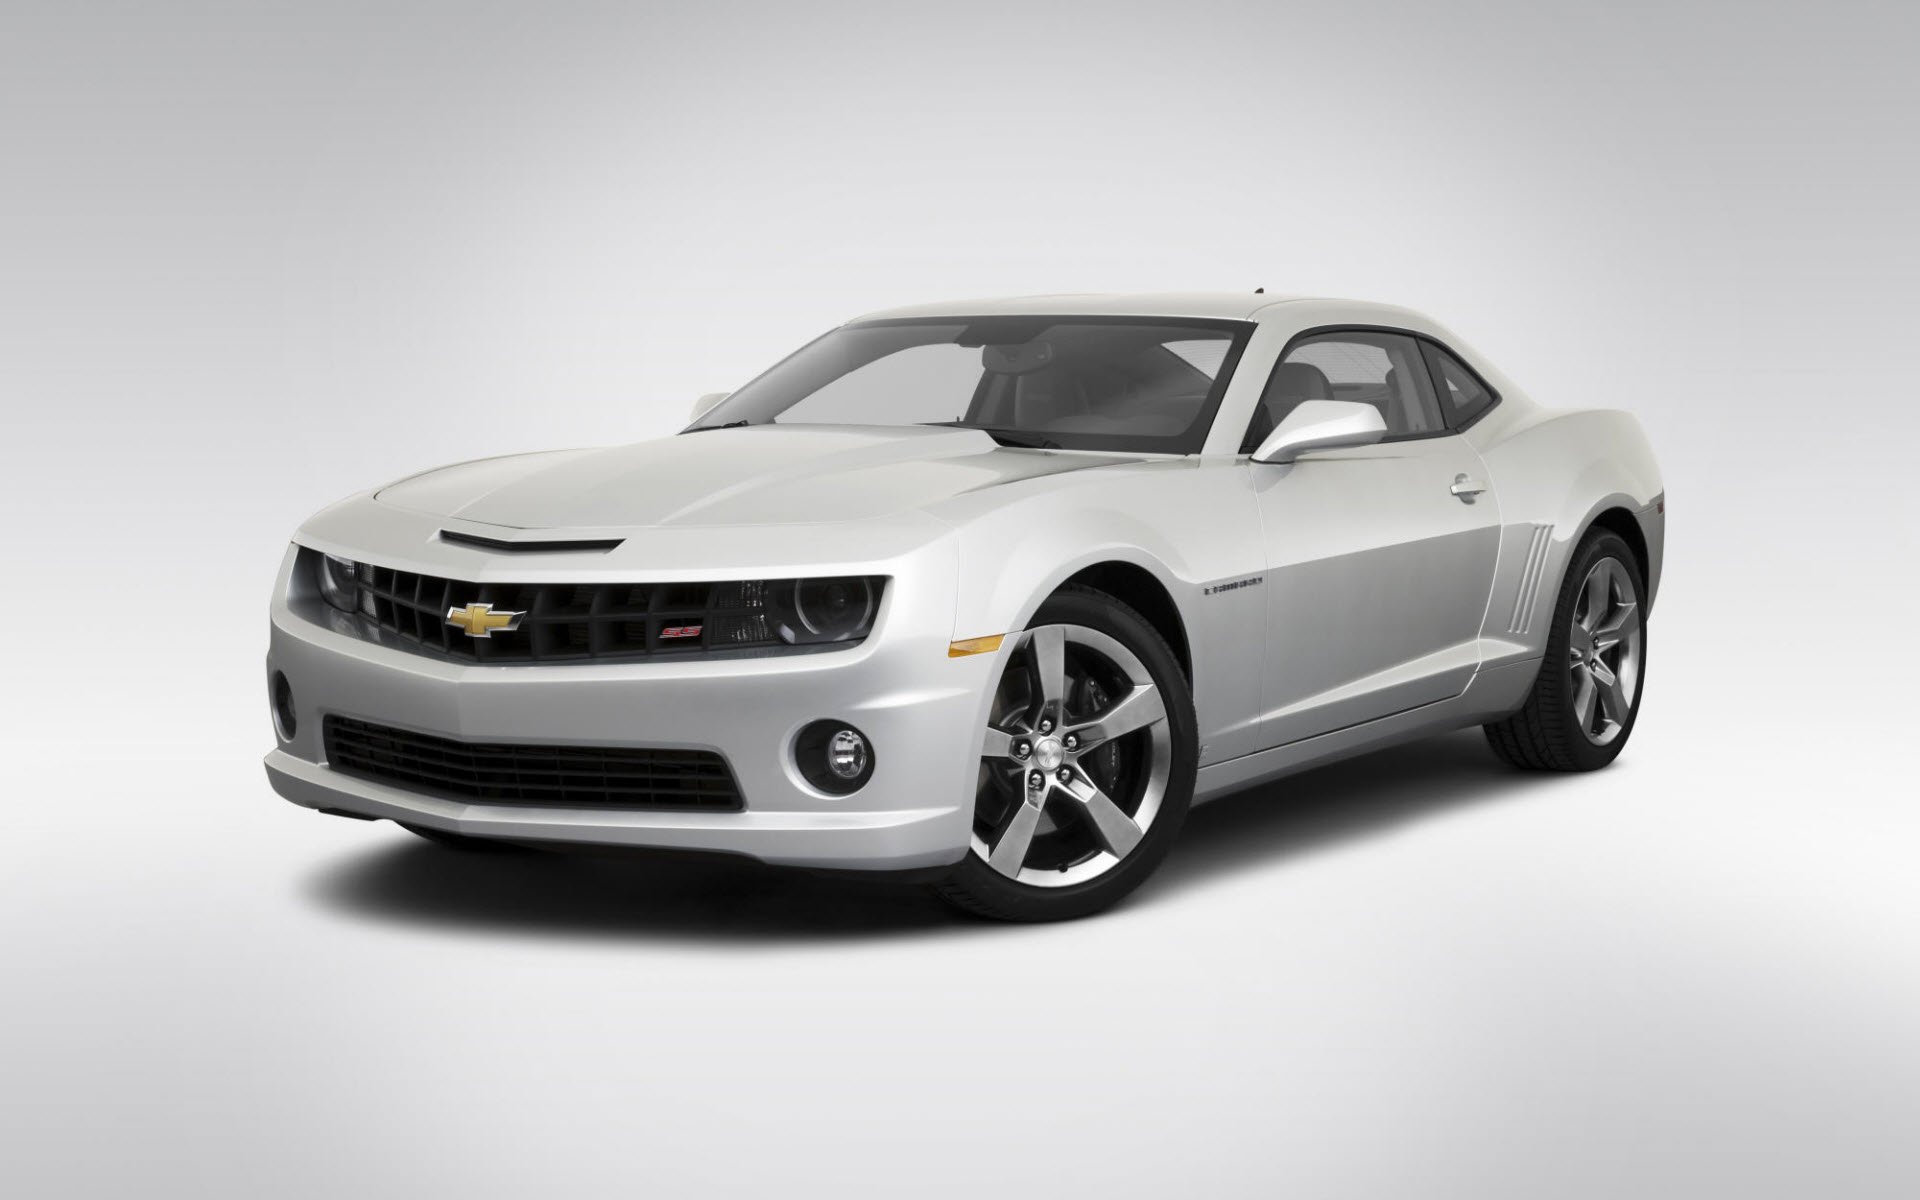  Chevrolet Camaro 2SS Wallpapers HD Wallpapers